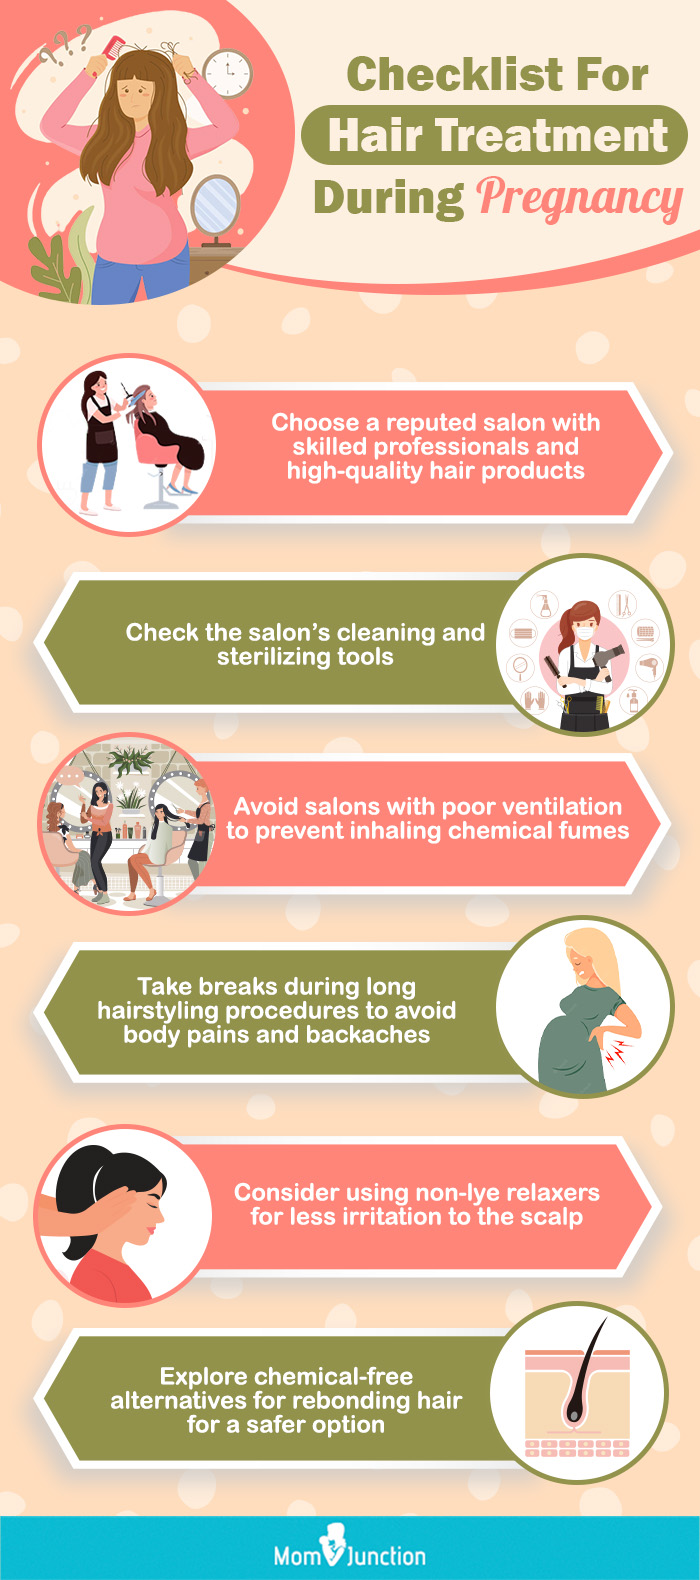 checklist for hair treatment during pregnancy (infographic)